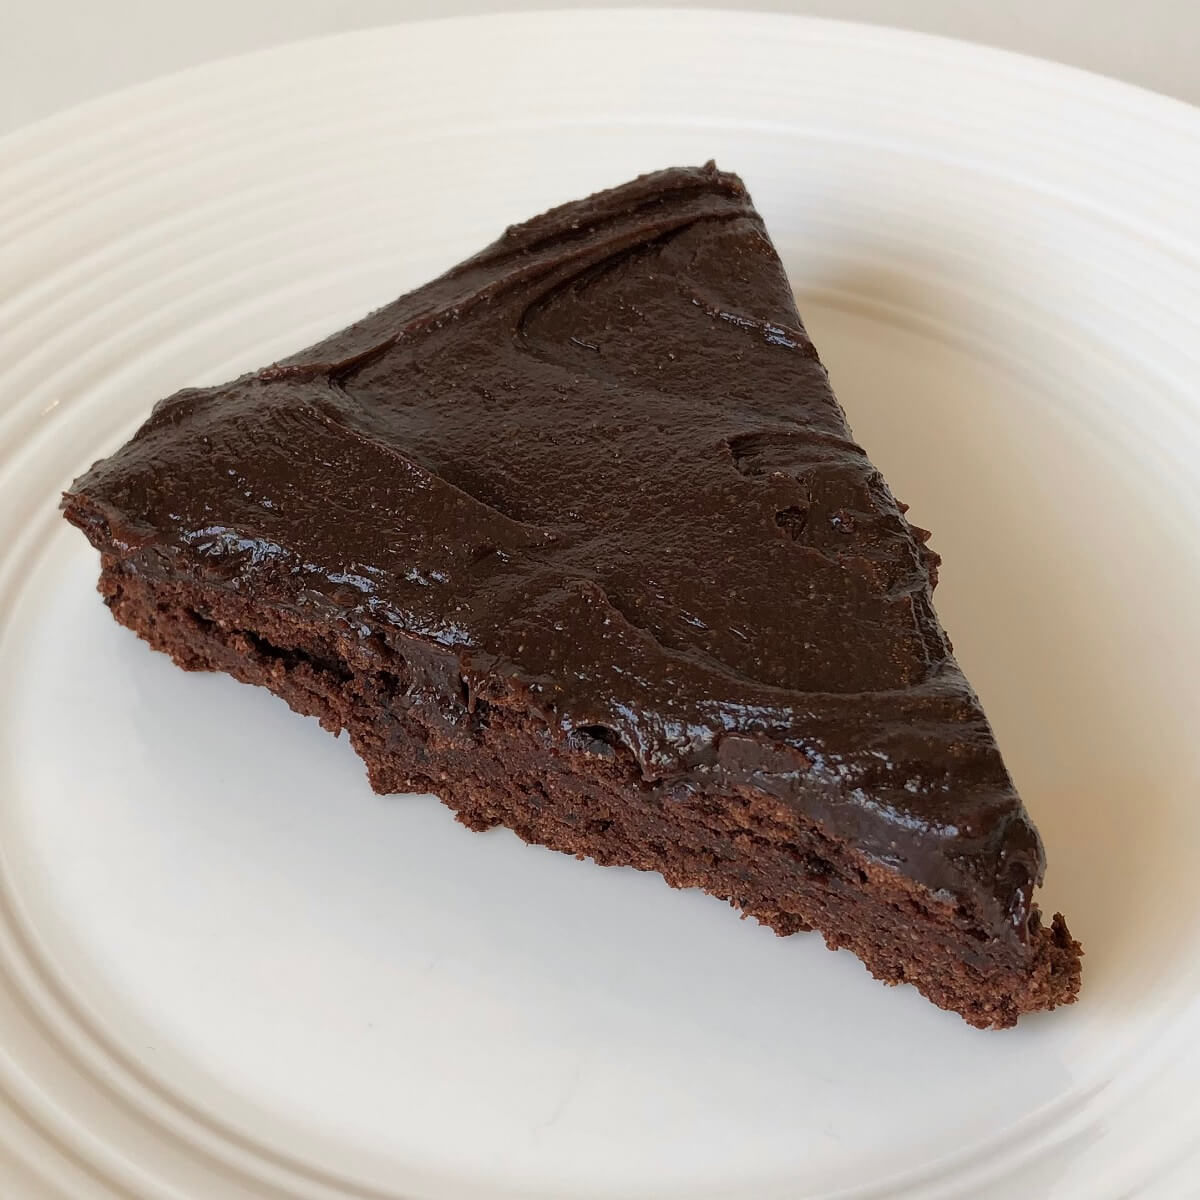 A slice of naturally sweetened chocolate cake on a white plate.